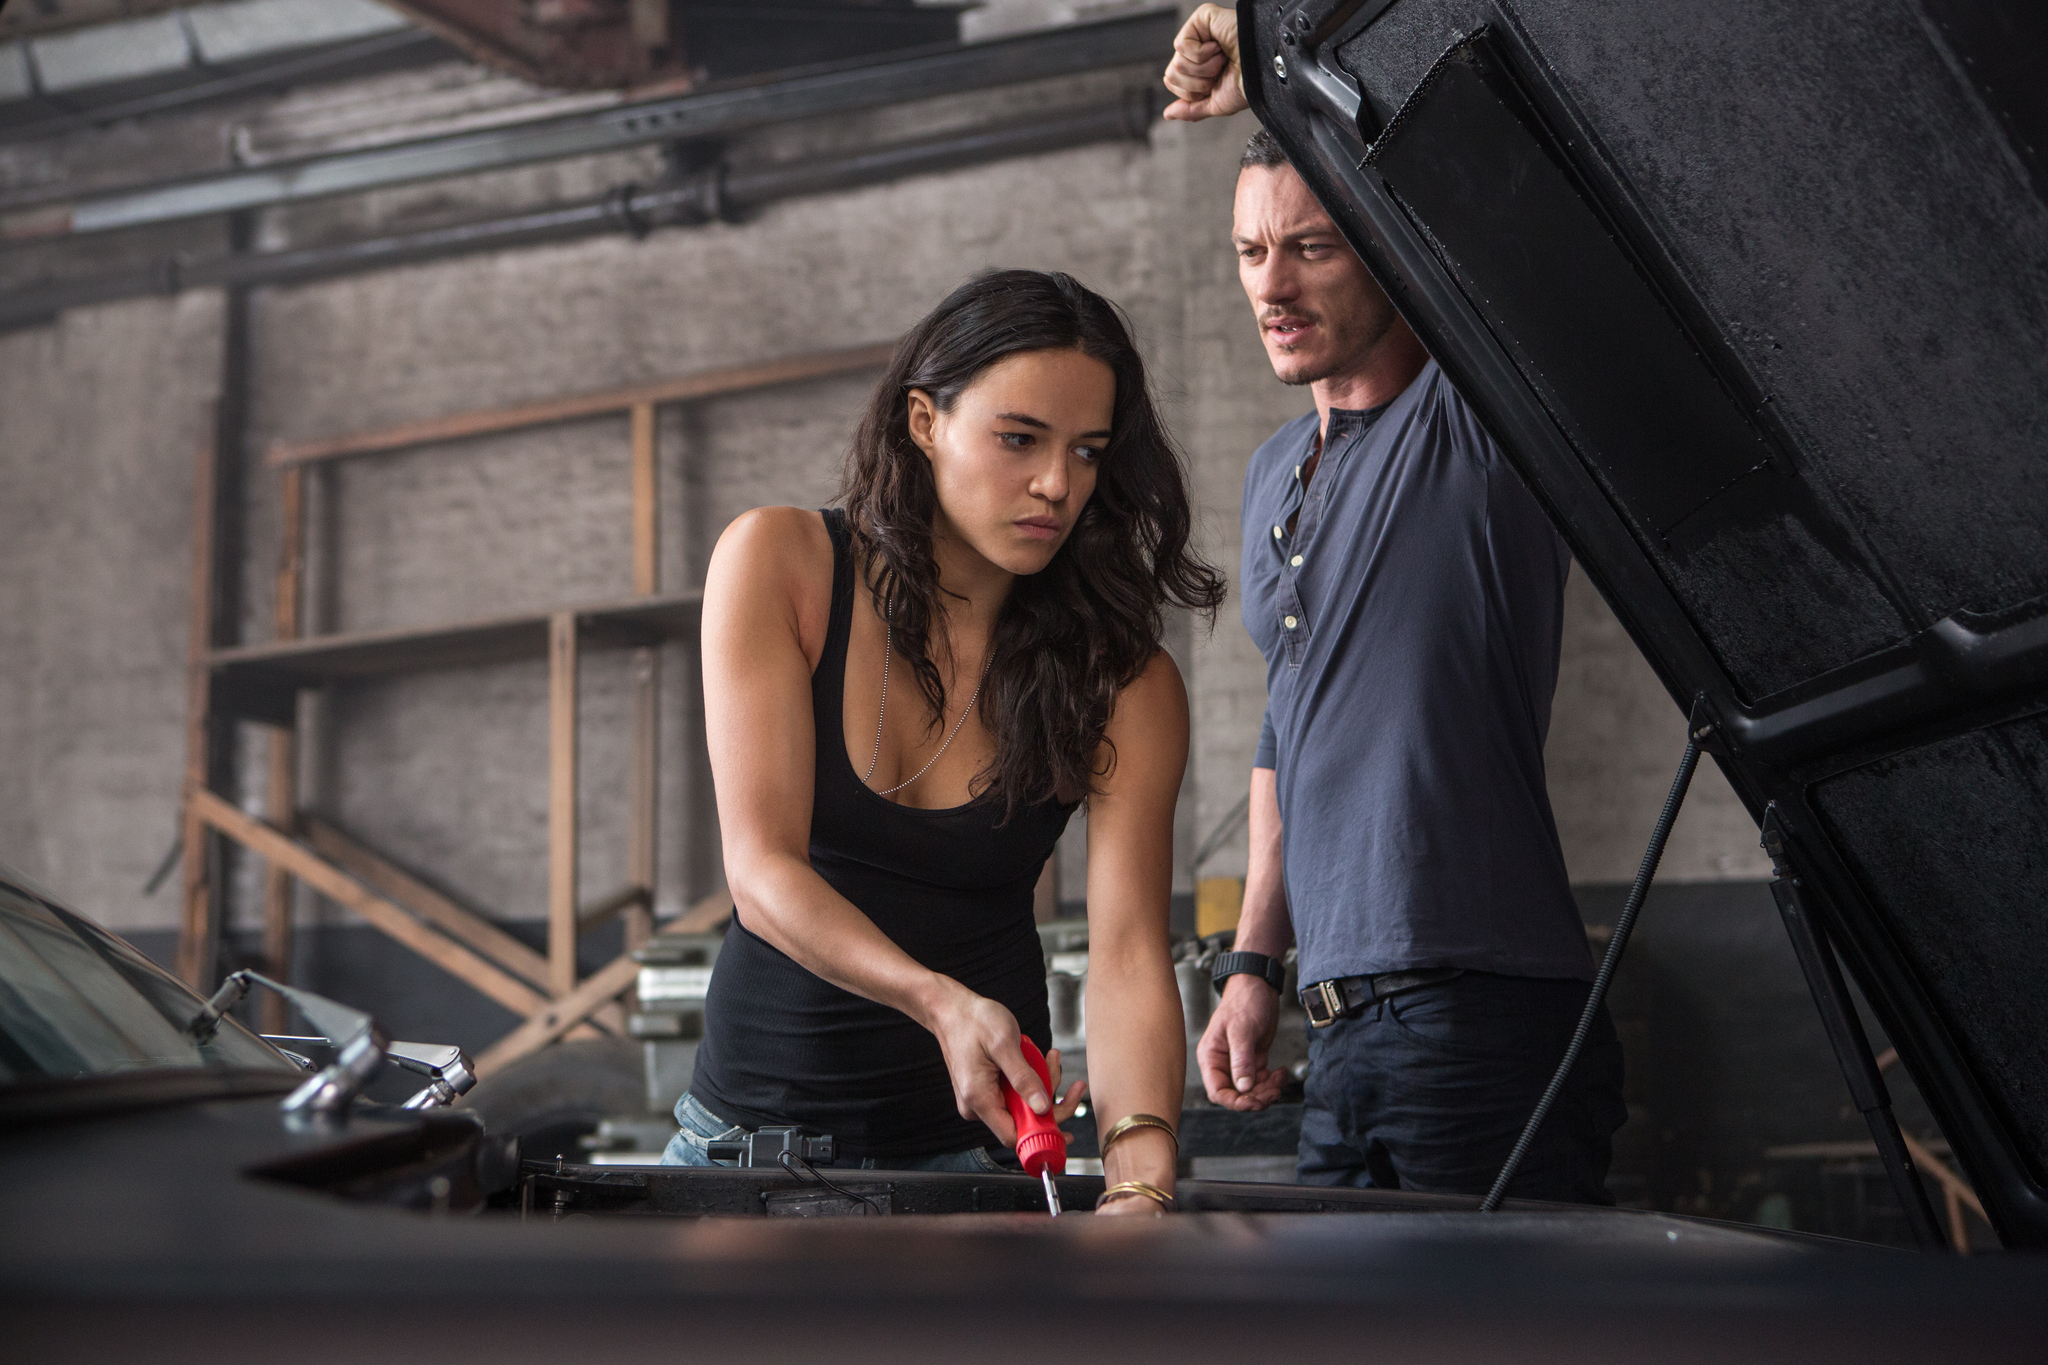 Michelle Rodriguez and Luke Evans in Fast & Furious 6 (2013)